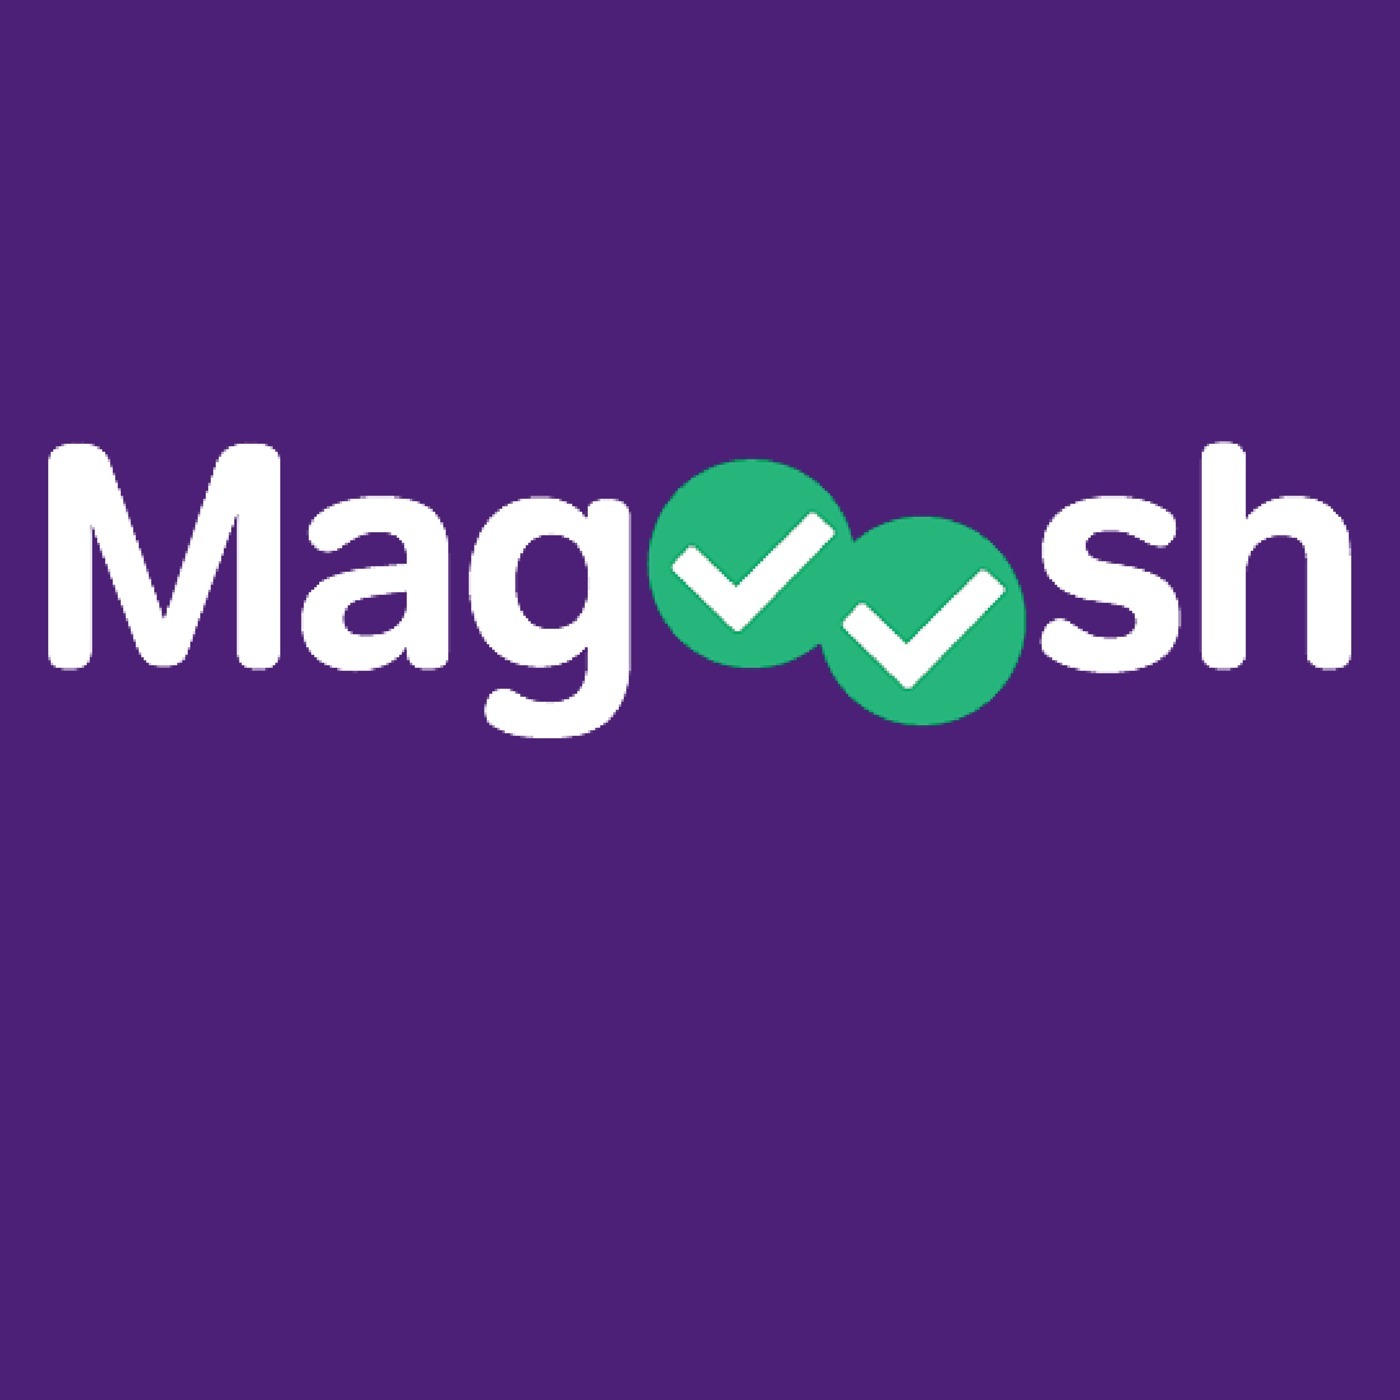 Interview with Magoosh CEO